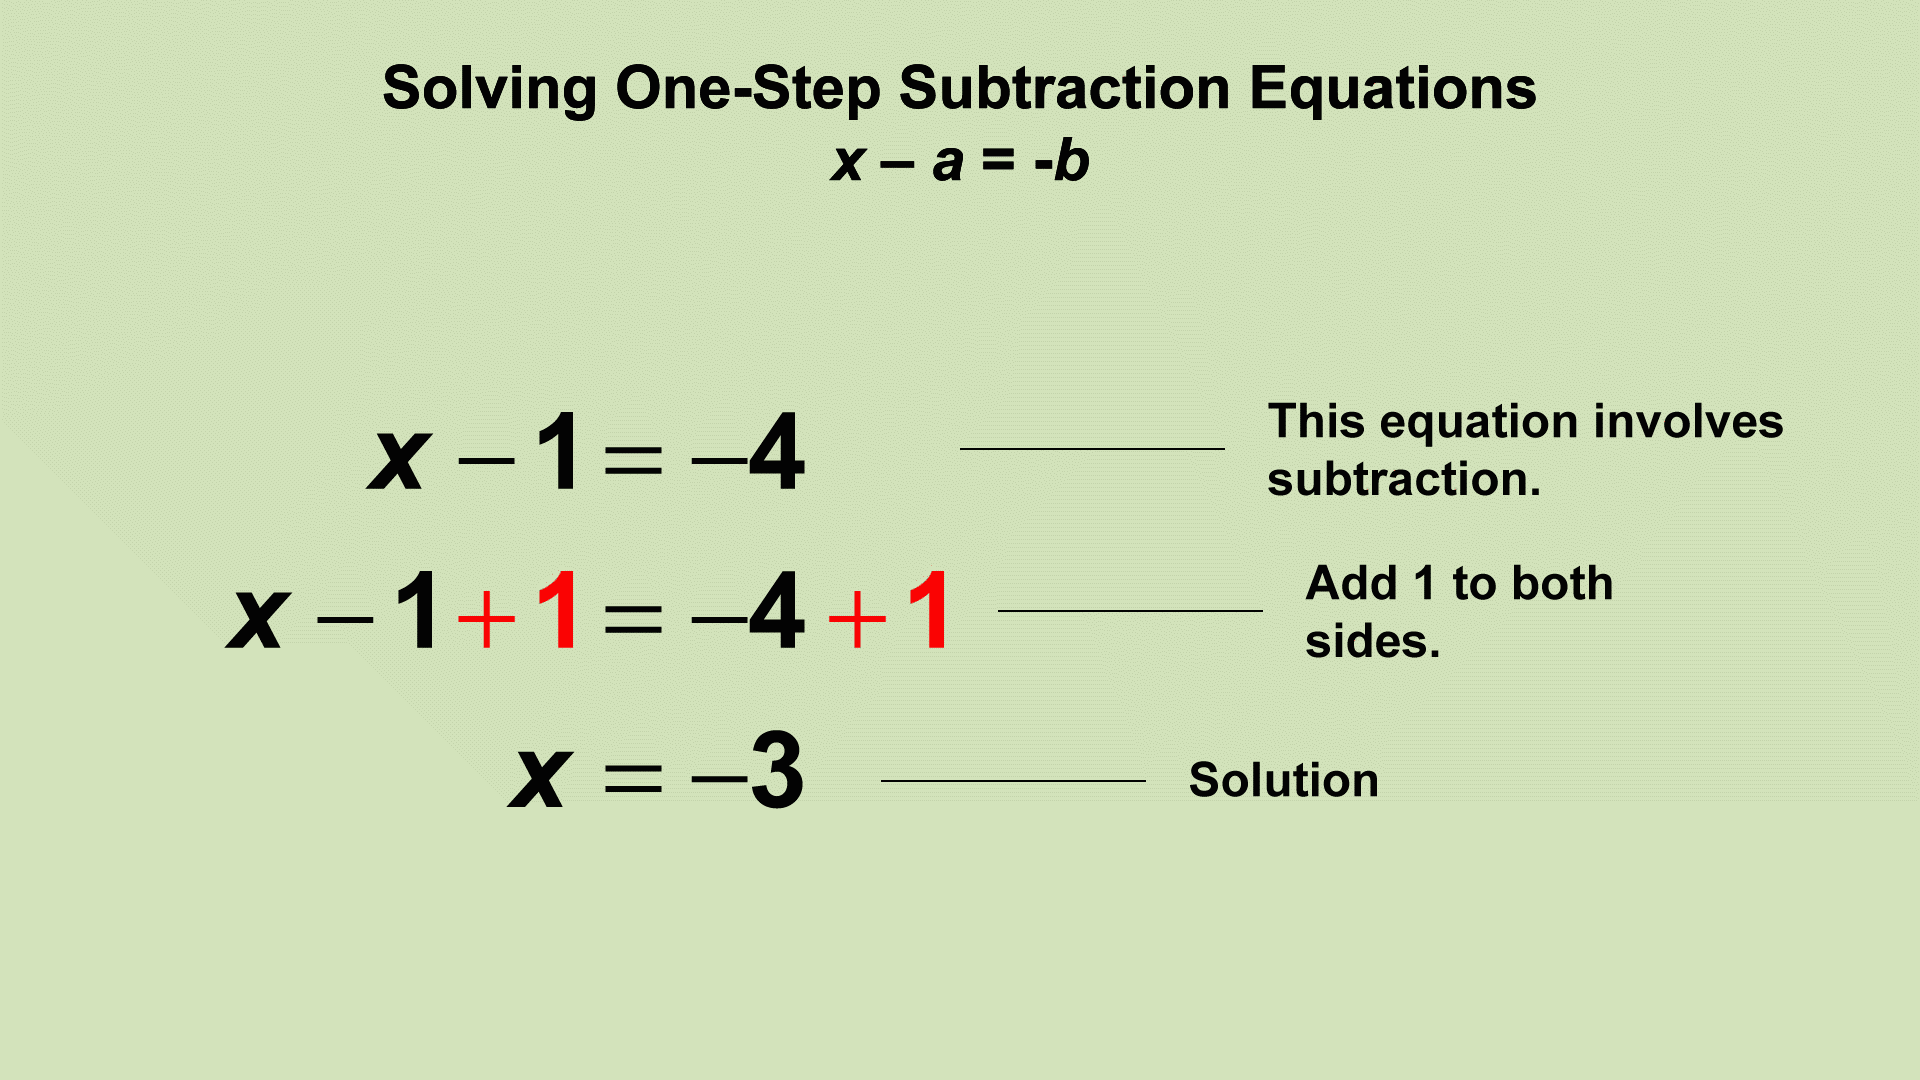 animated-math-clip-art-equations-solving-one-step-subtraction-equations-3-media4math